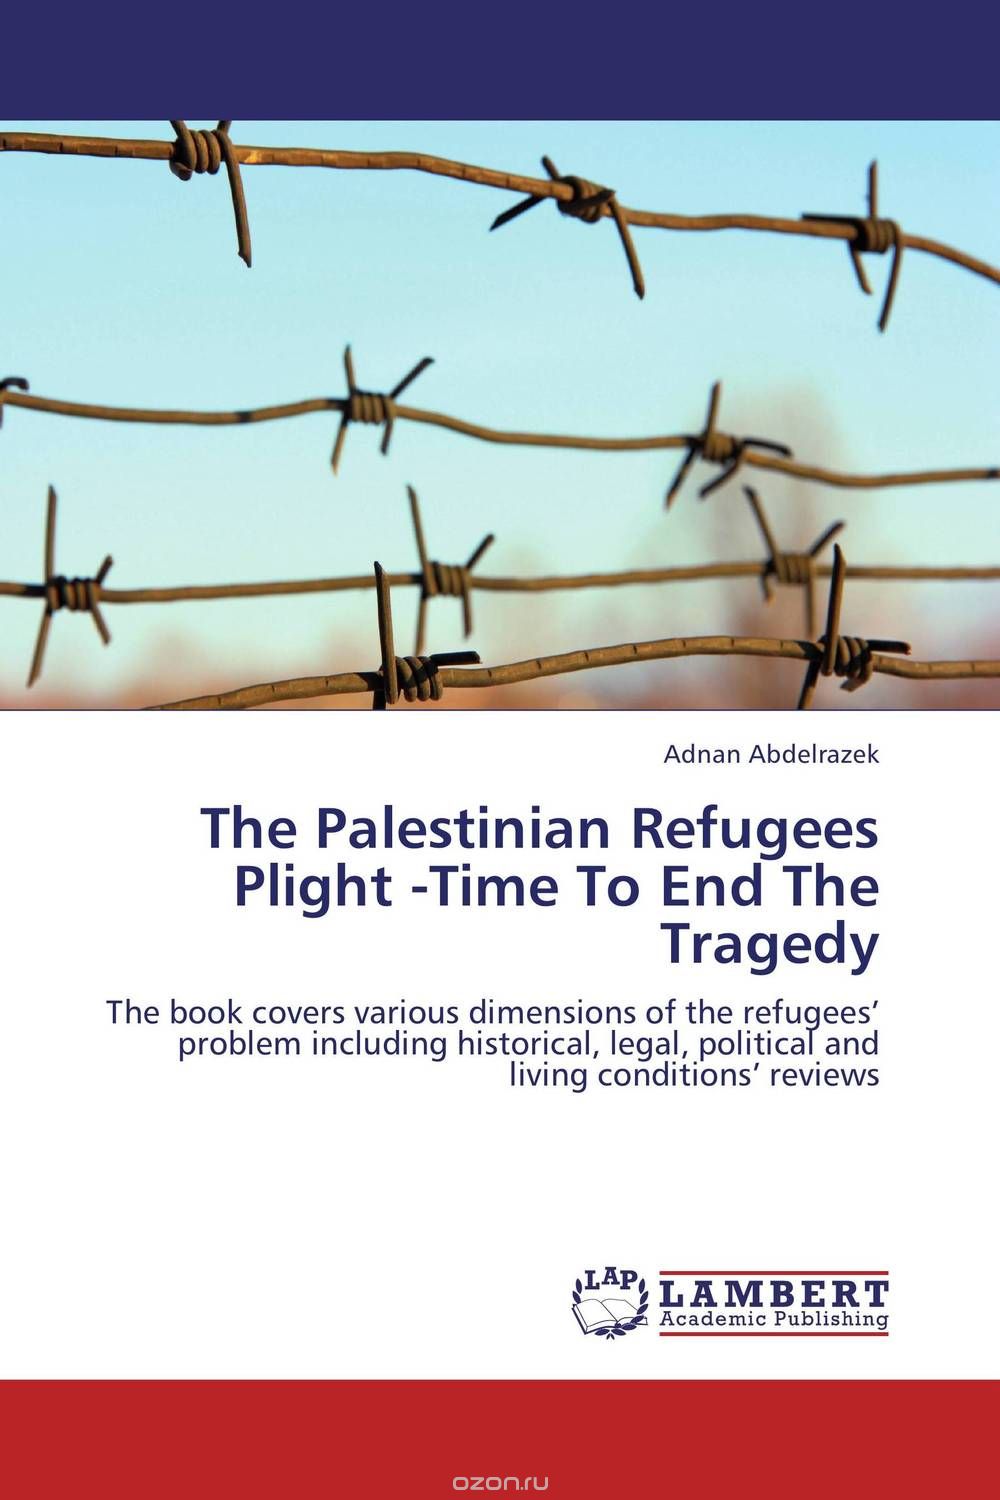 Скачать книгу "The Palestinian Refugees Plight -Time To End The Tragedy"